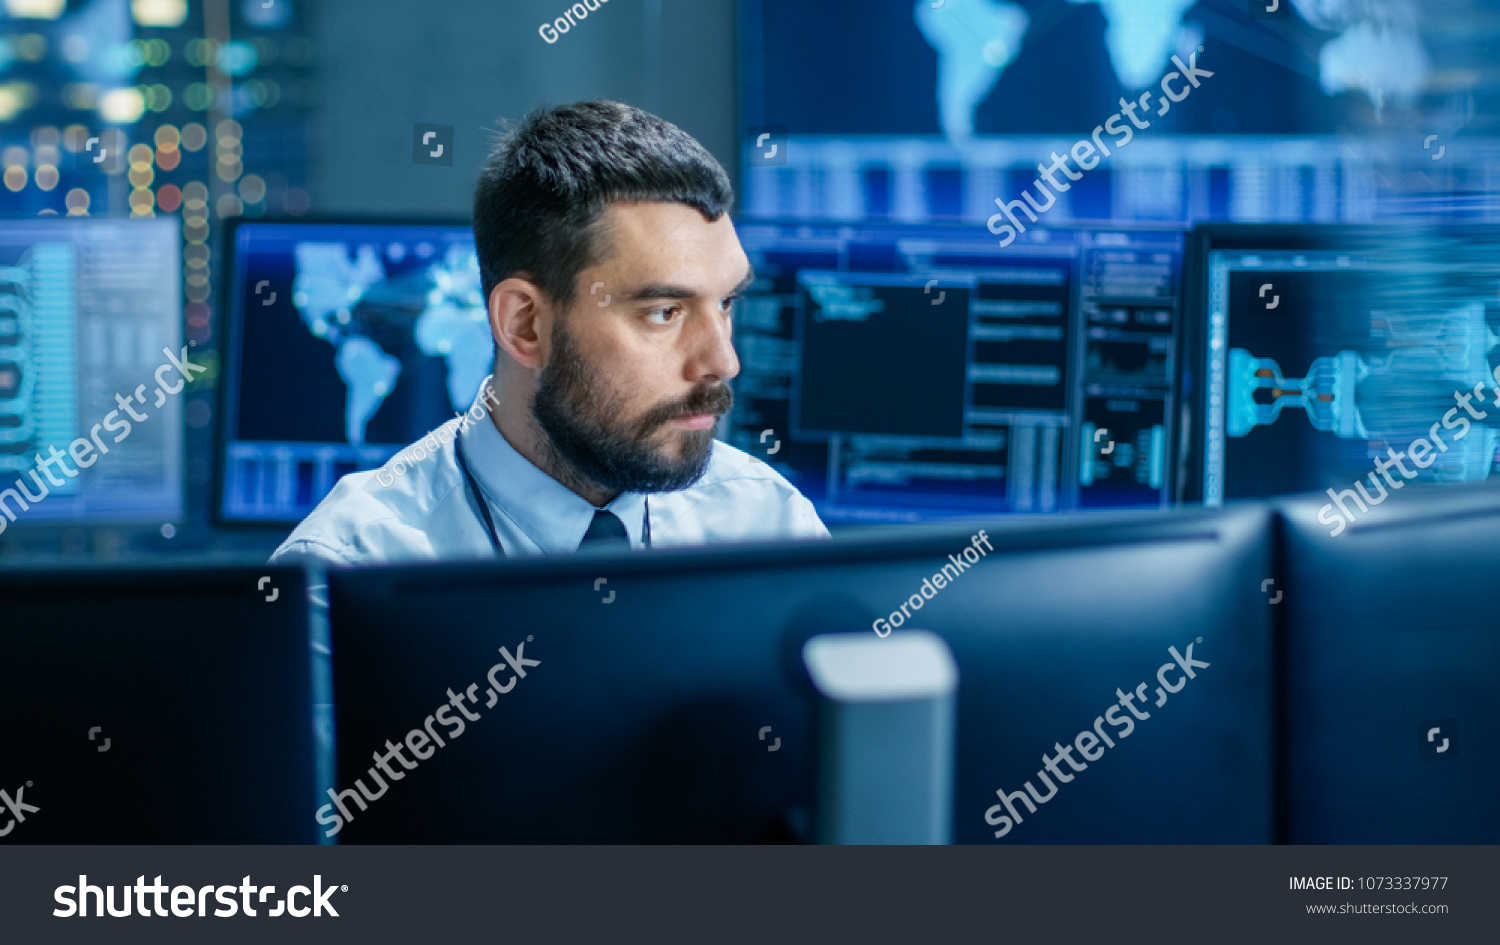 In the Monitoring Room Technical Operator Attentively Monitors Stability of the System. He's Surrounded By Screens Showing Technical Data. #1073337977